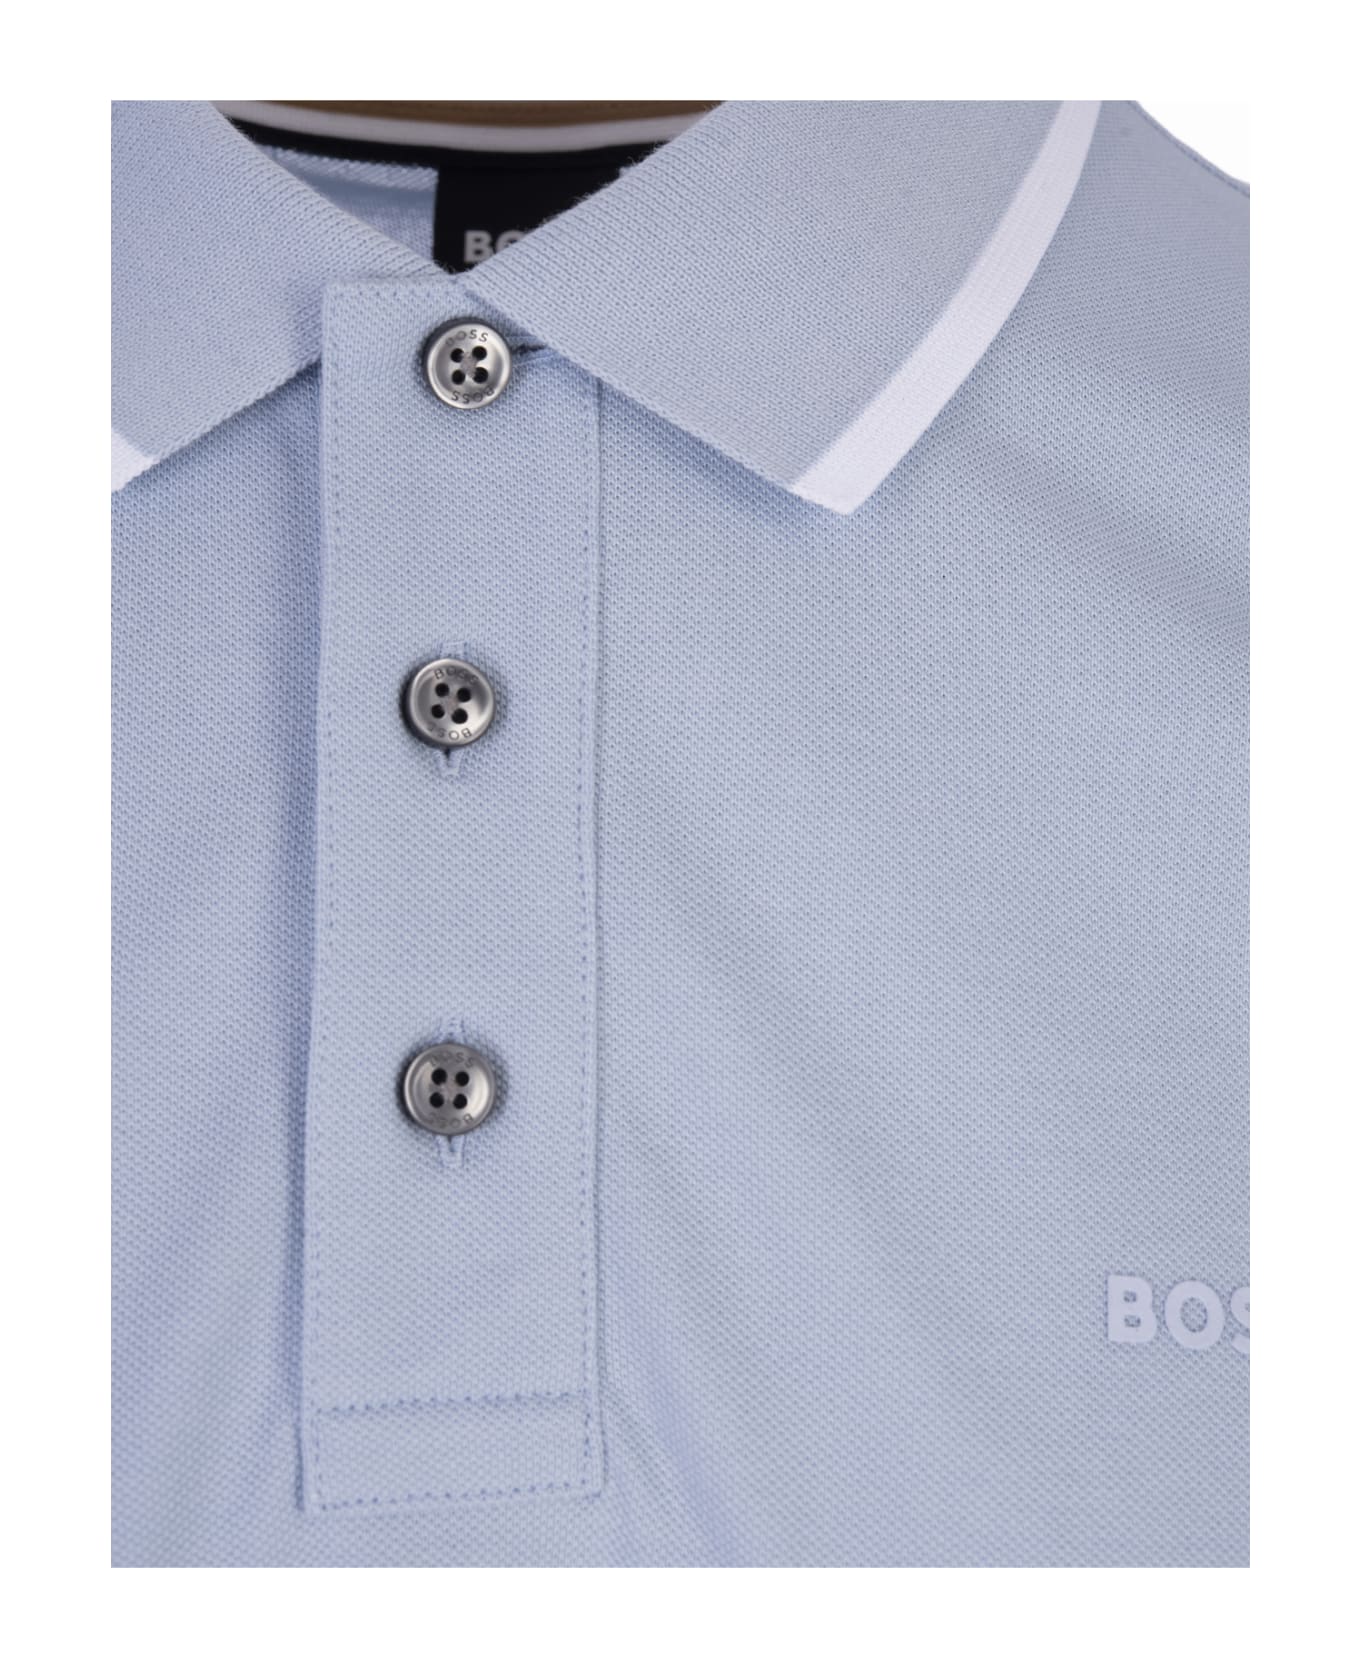 Hugo Boss Dust Blue Slim Fit Polo Shirt With Striped Collar - Light Pastel Blue